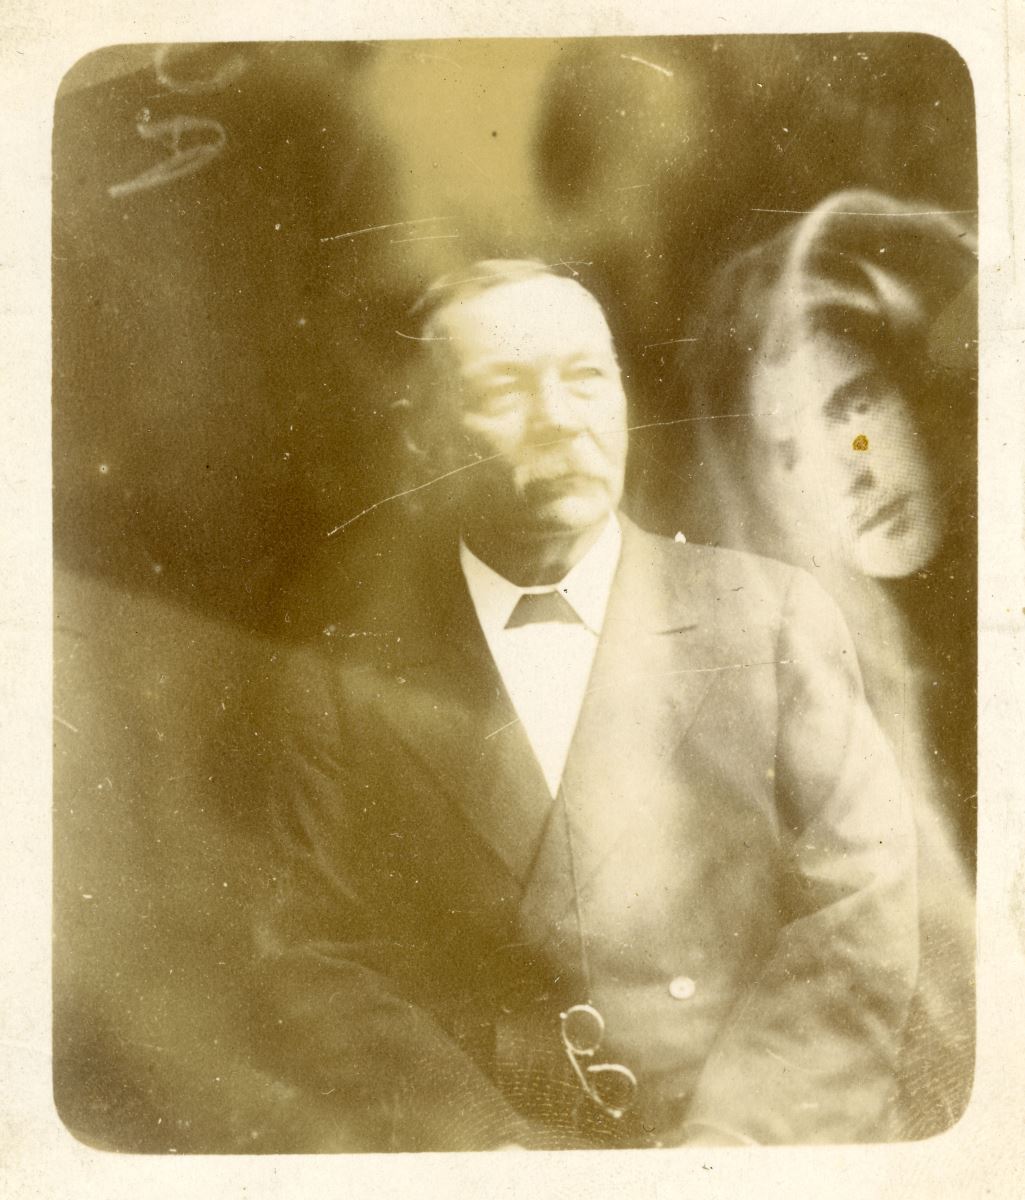 A photo of conan doyle with a ghostly face in the background